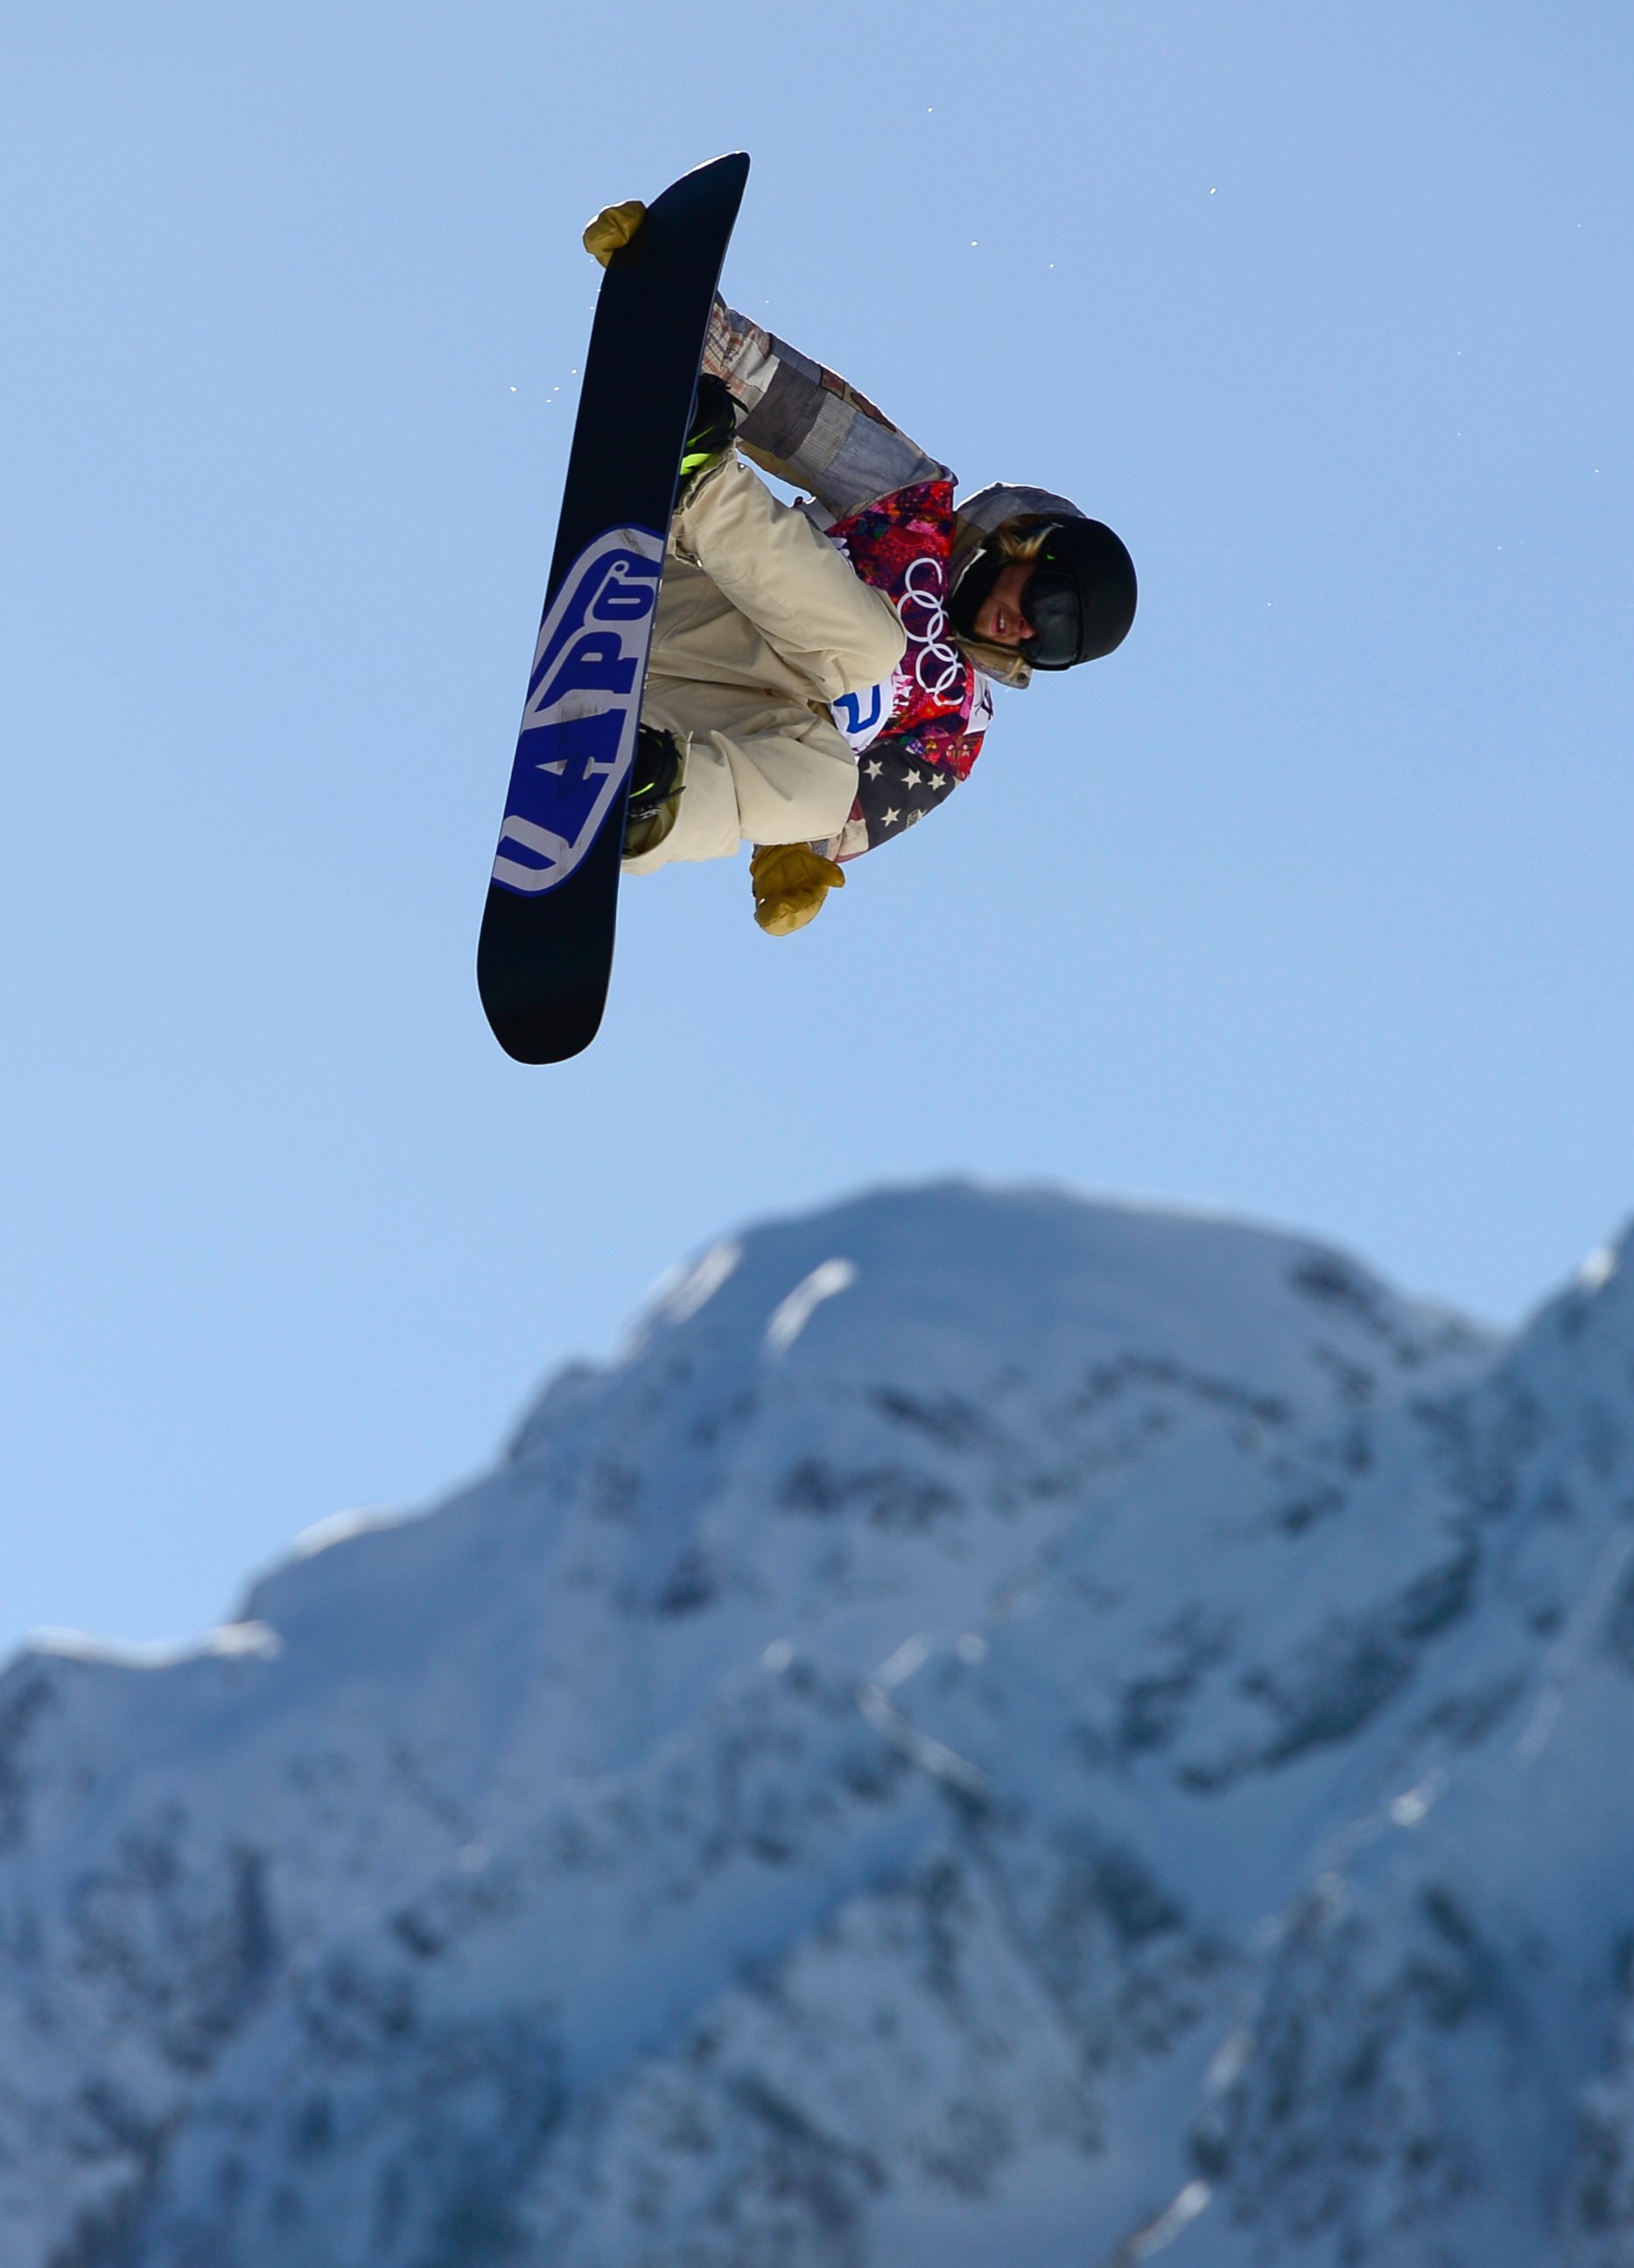 PHOTO: Sage Kotsenburg of the U.S. competes in the men's snowboard slopestyle second heat qualification at the Rosa Khutor Extreme Park during the Sochi Winter Olympics, Feb. 6, 2014.